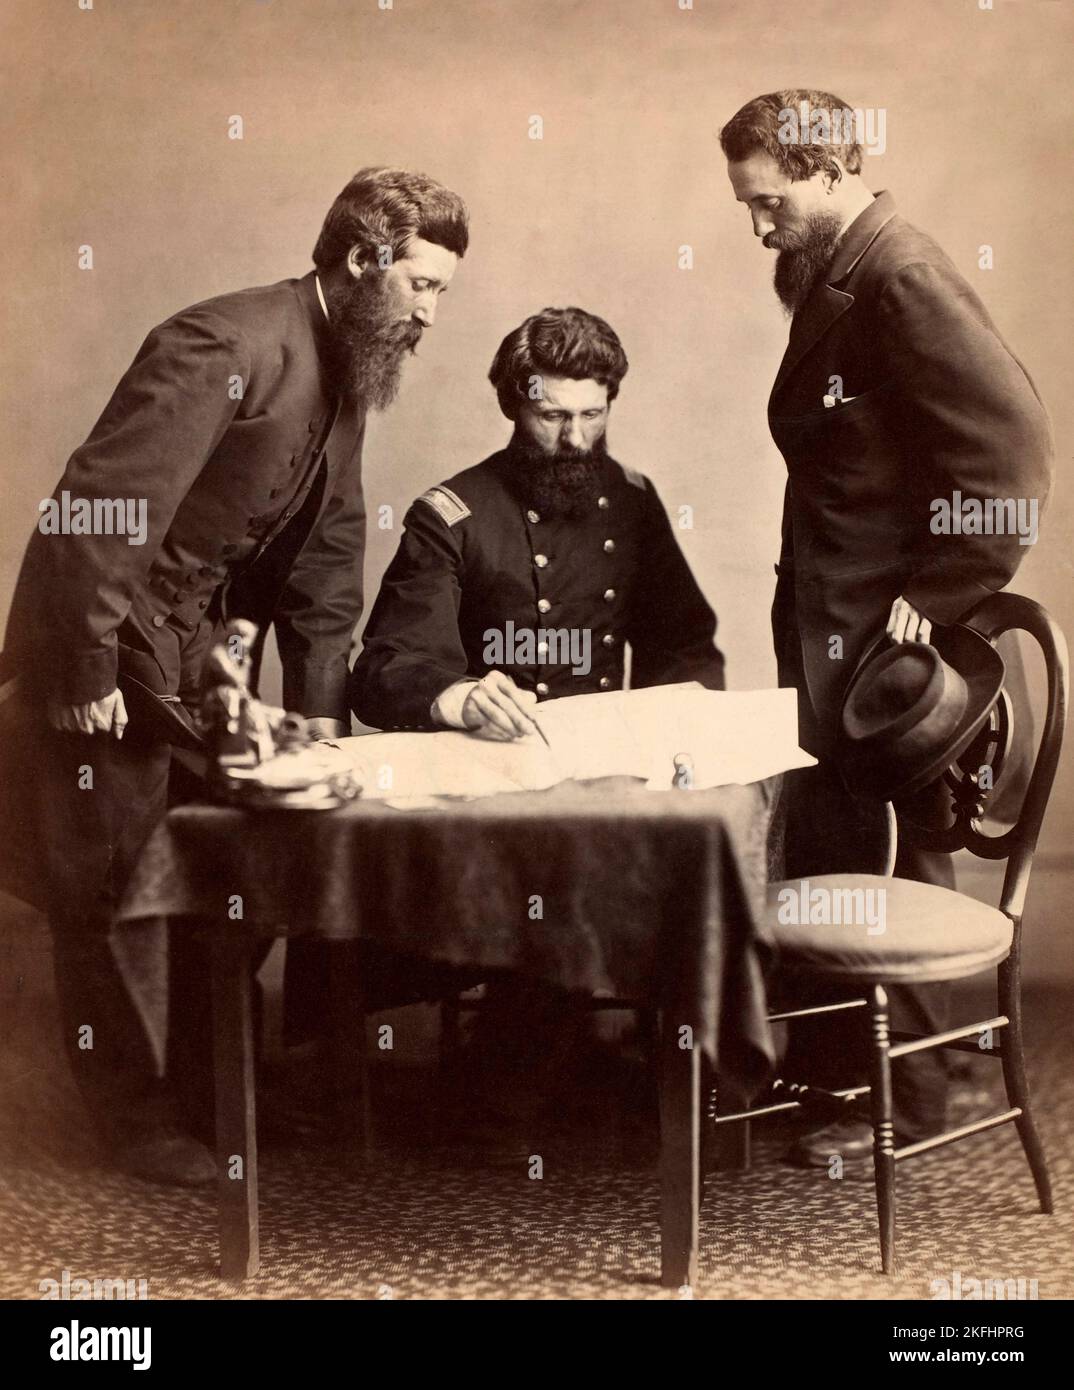 American civil war - Planning of capture of Booth - photo by Alexander Gardner in 1865 Stock Photo